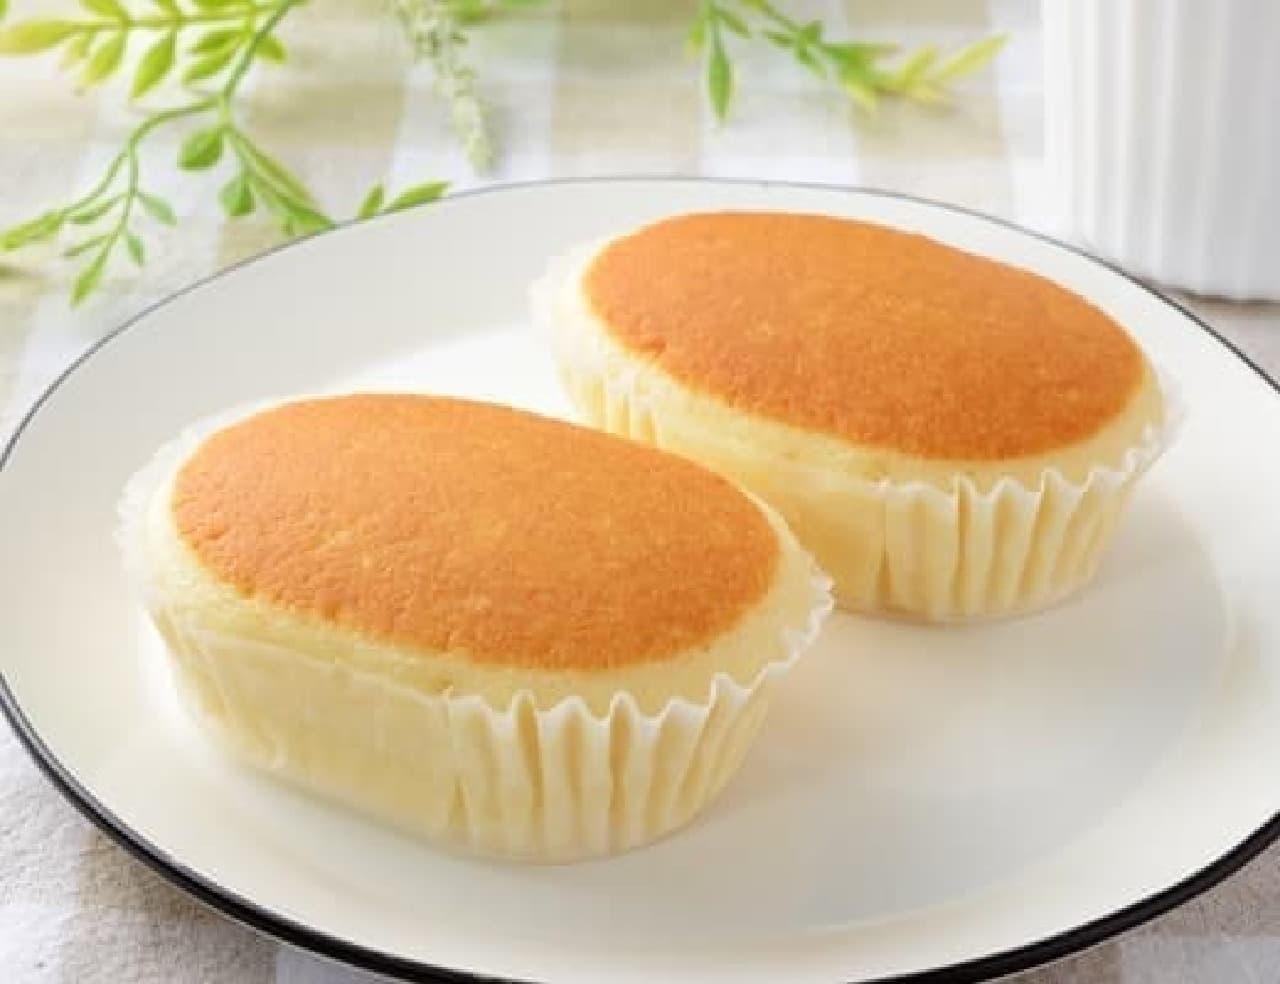 Lawson "NL Blanc Cheese Steamed Cake 2 Pieces-Lactic Acid Bacteria"